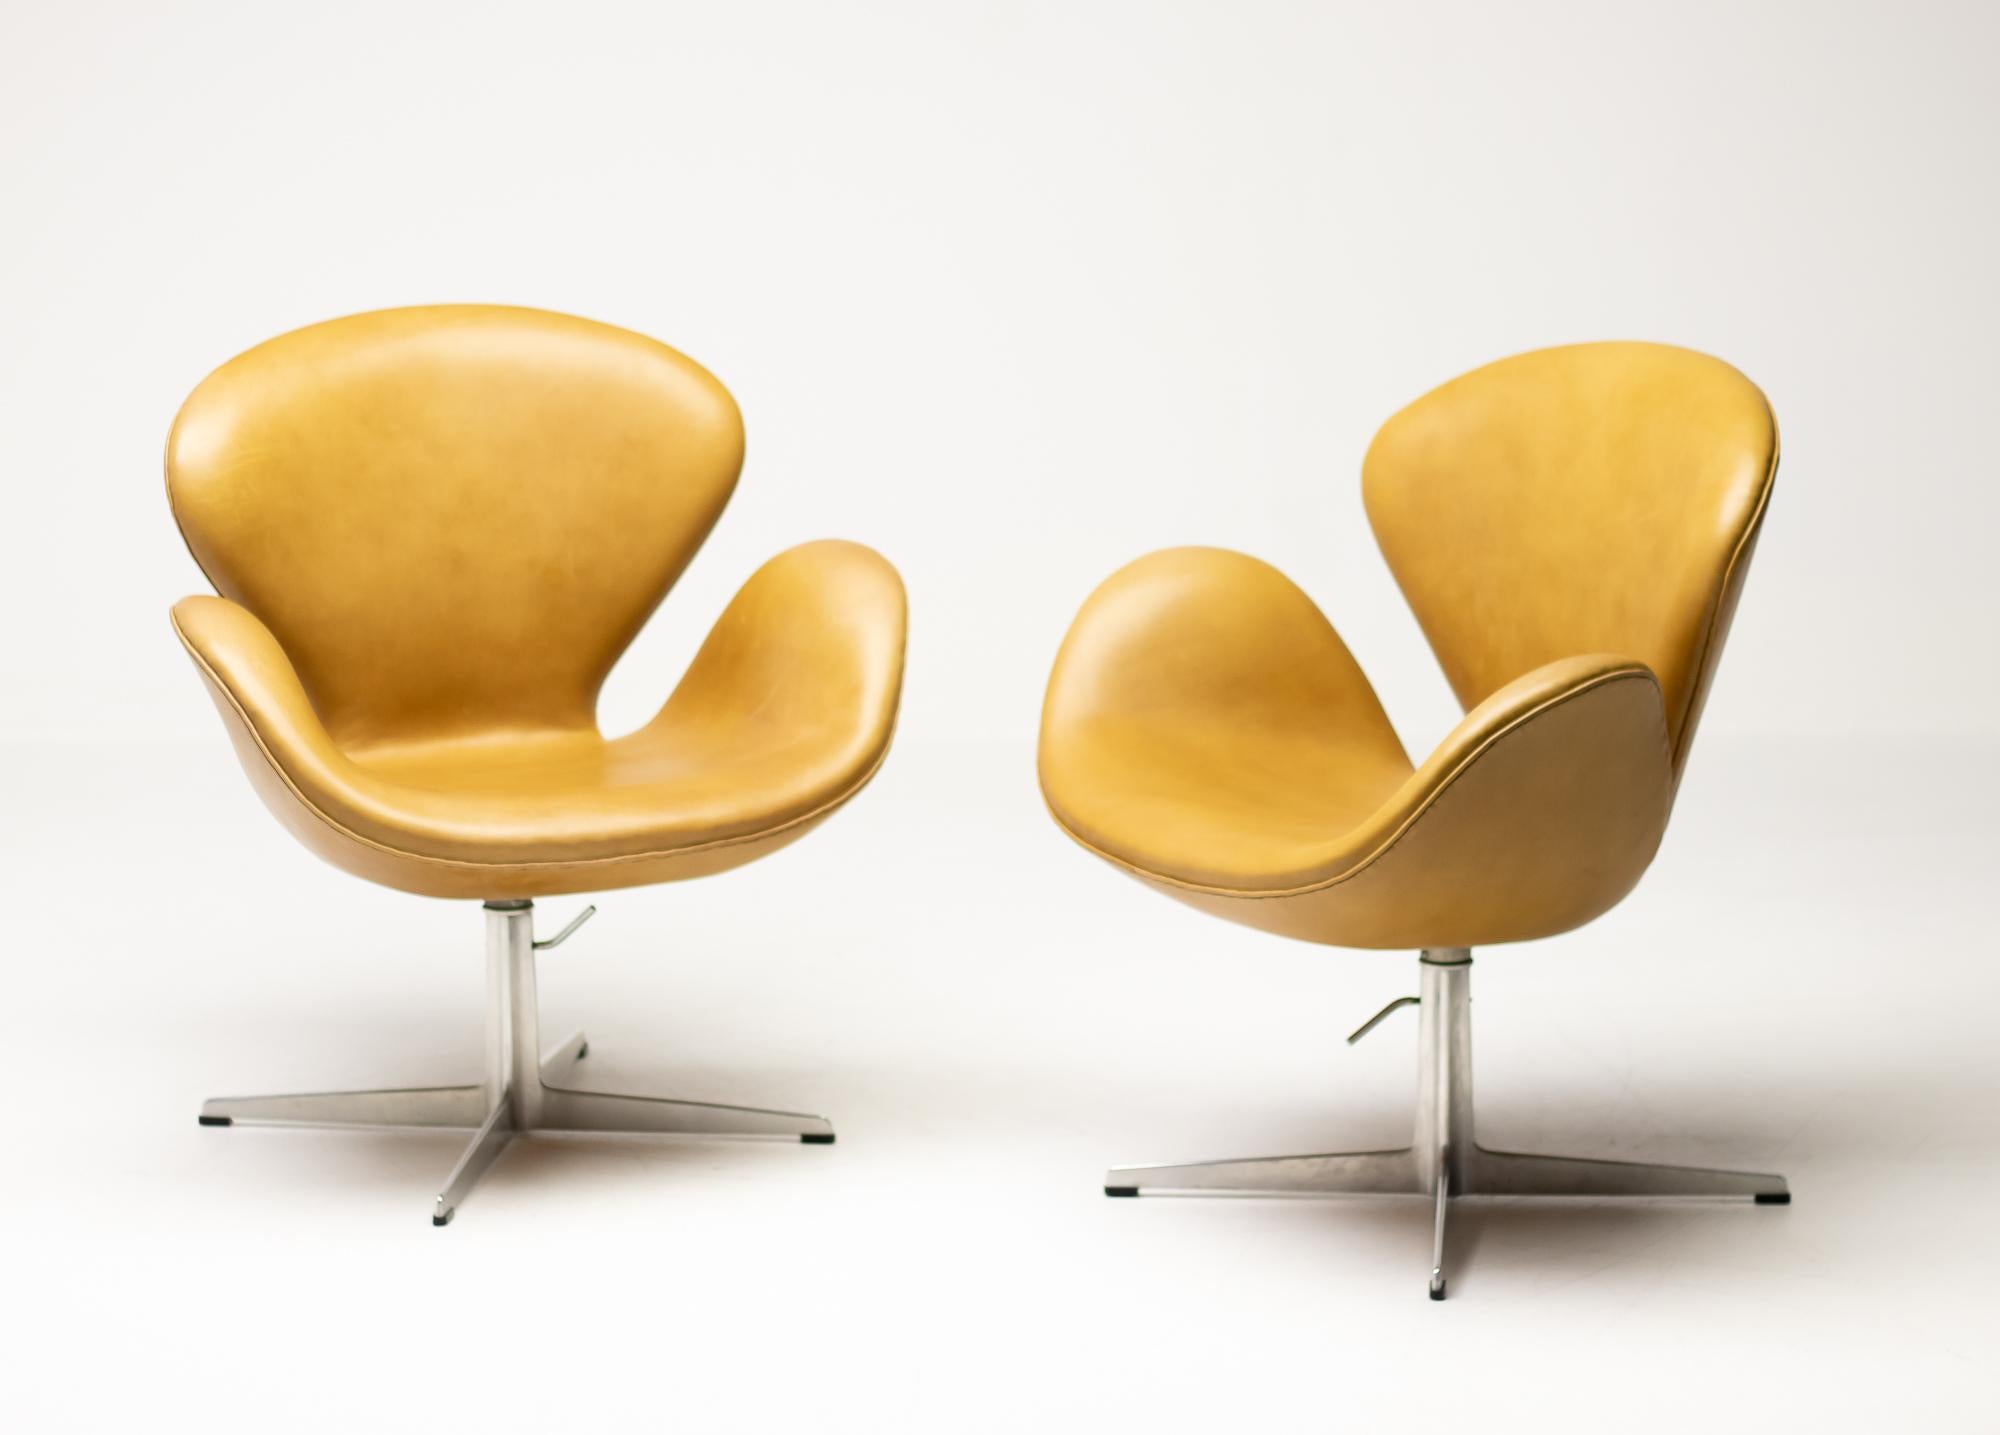 Matching pair of Swan Chairs in beautiful light brown natural leather. 
The chairs have the very rare option of height adjustability, so you could use them as a desk or dining chair as well.
Reupholstered in Denmark circa 8 years ago with new foam